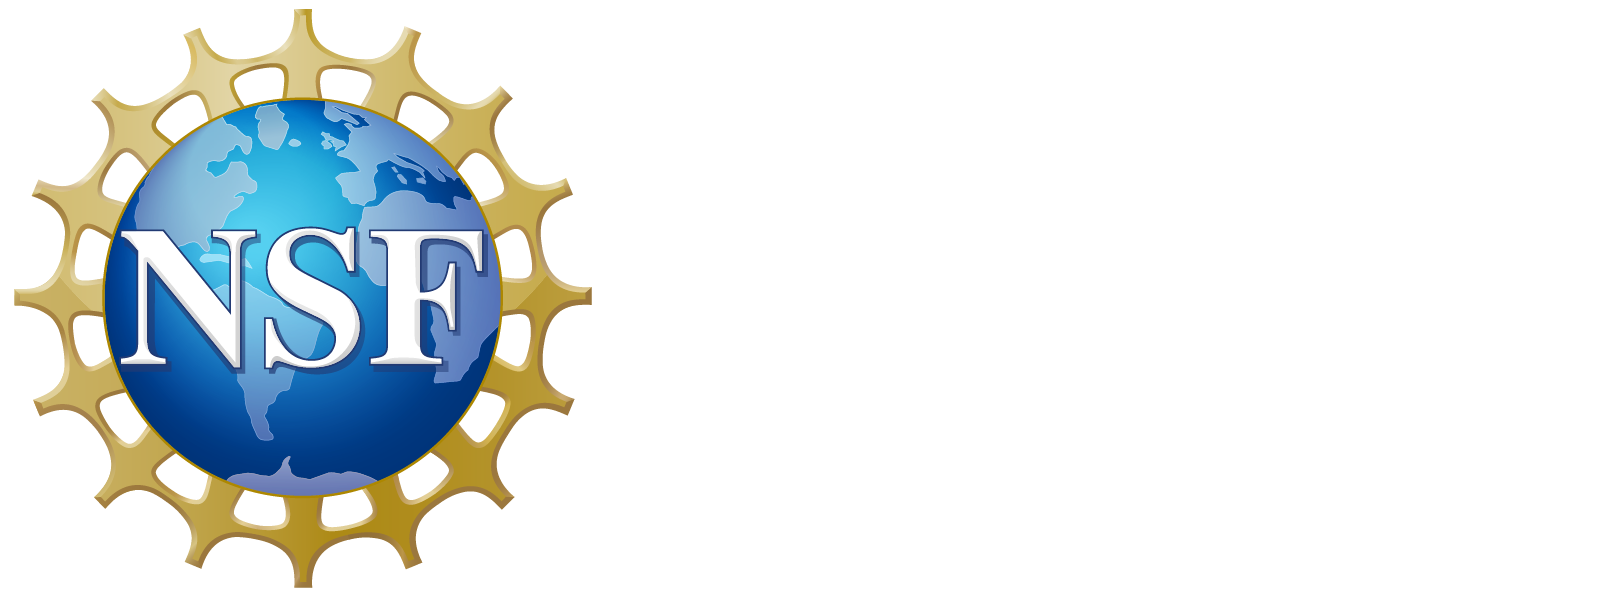 Arecibo C3 logo in whtie: Arecibo with the A tilted slightly and the A crossbar a curved line that flattens out and underscores 'recibo'. 'C' and '3' surround Ciencia, Computacion, Comunidad 